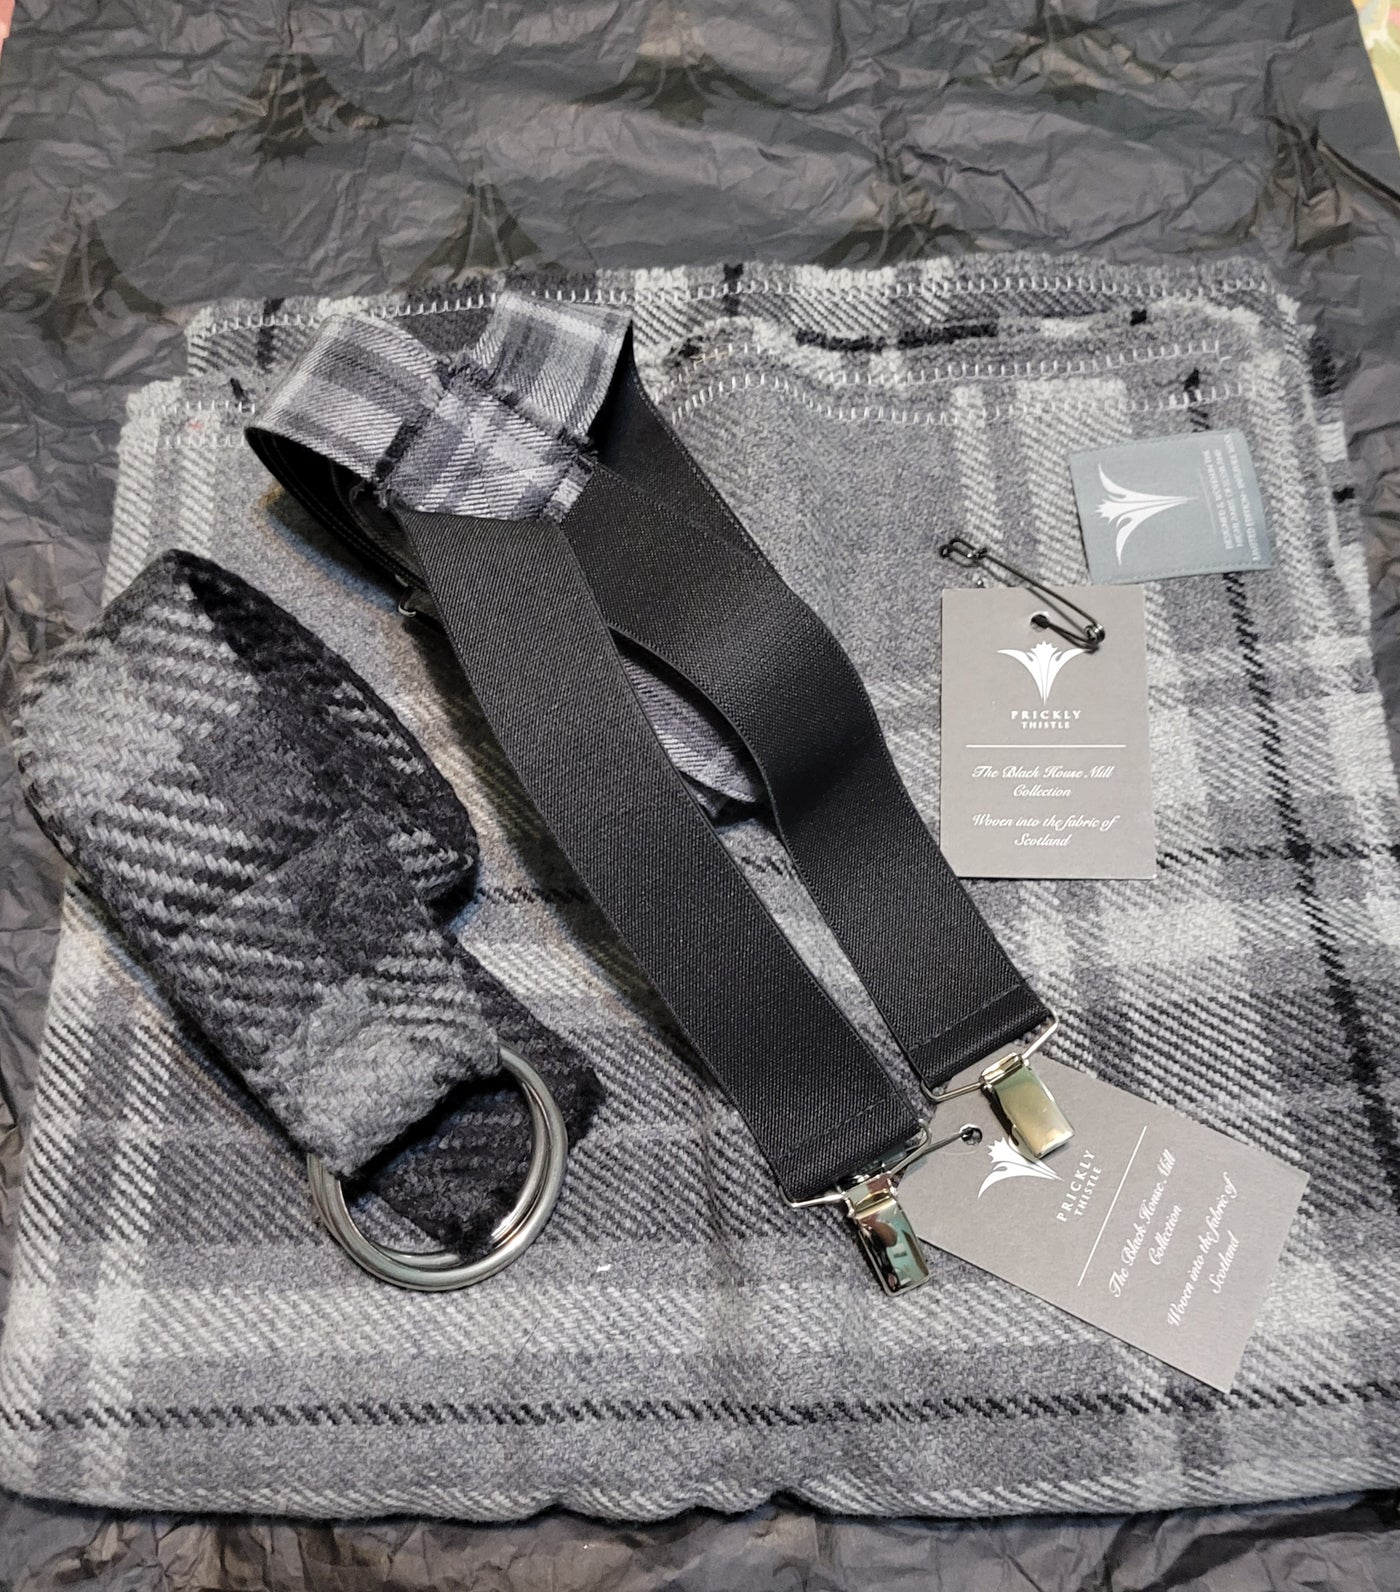 Repeal-It Marketplace - Black House Mill - Season 2 Twill - Blanket Scarf/ Braces and Belt